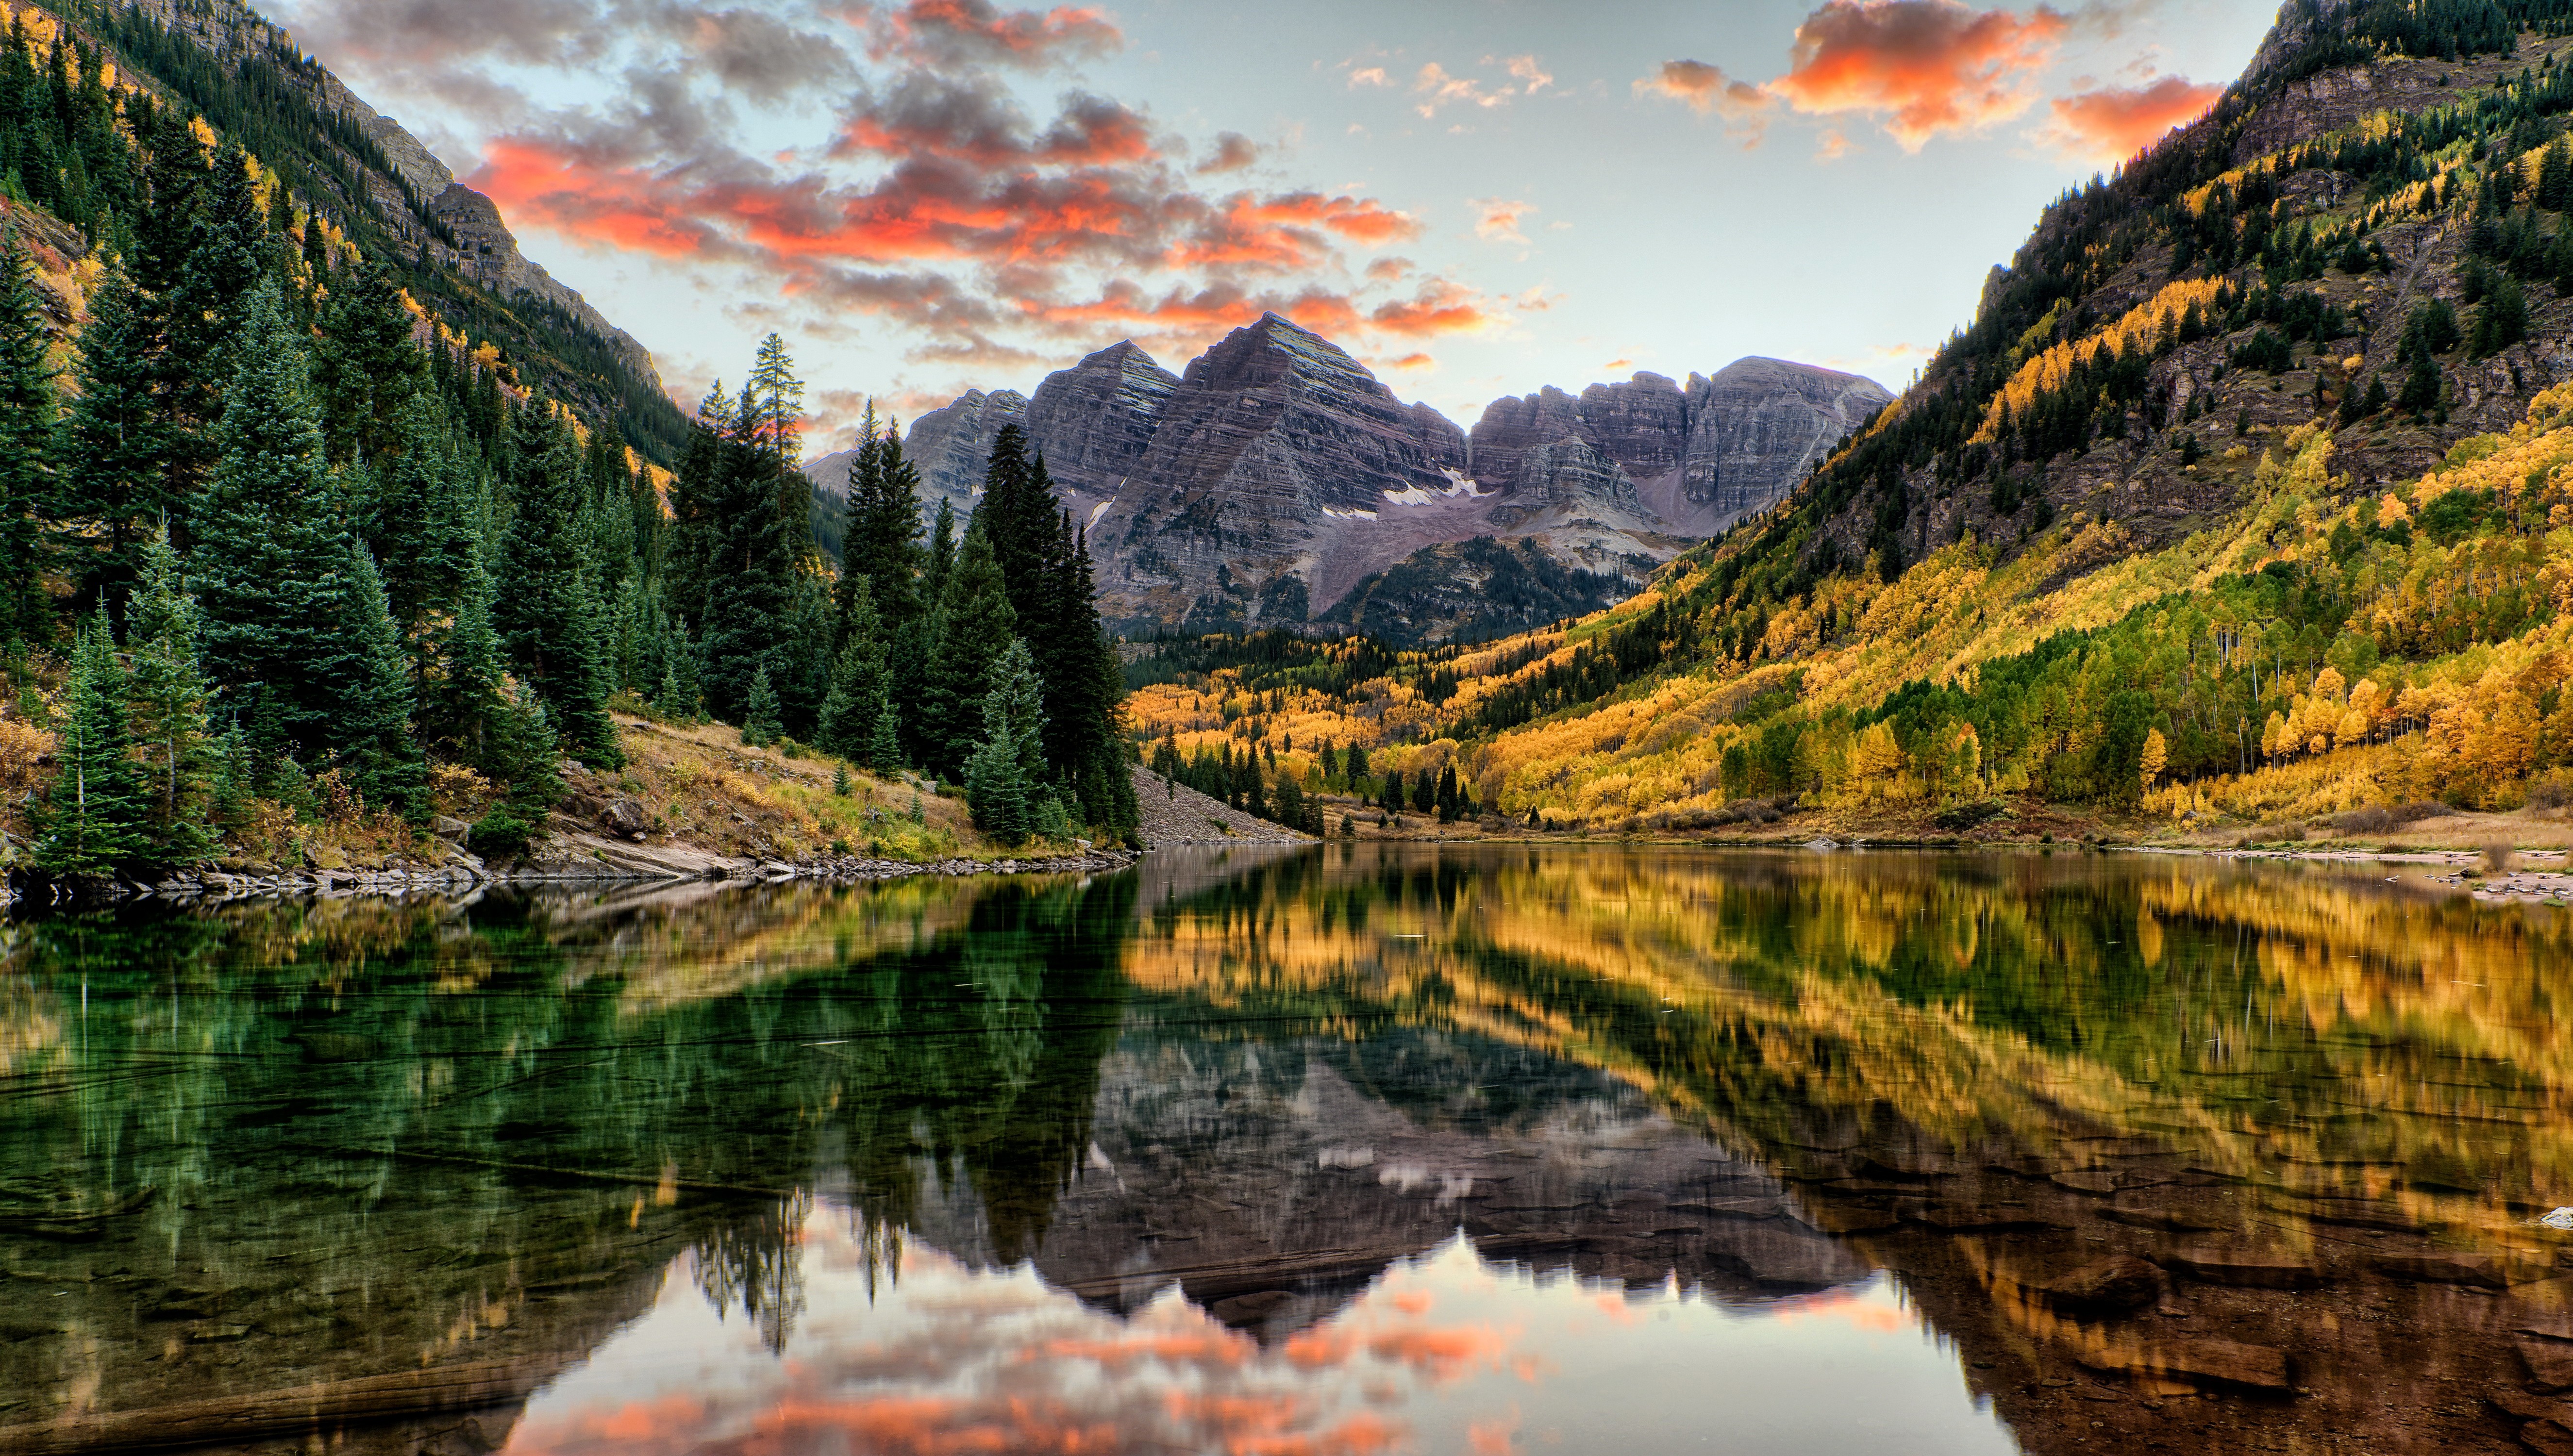 Forest Landscape Maroon Bells Colorado Mountains Lake Reflection Fall 5300x3000